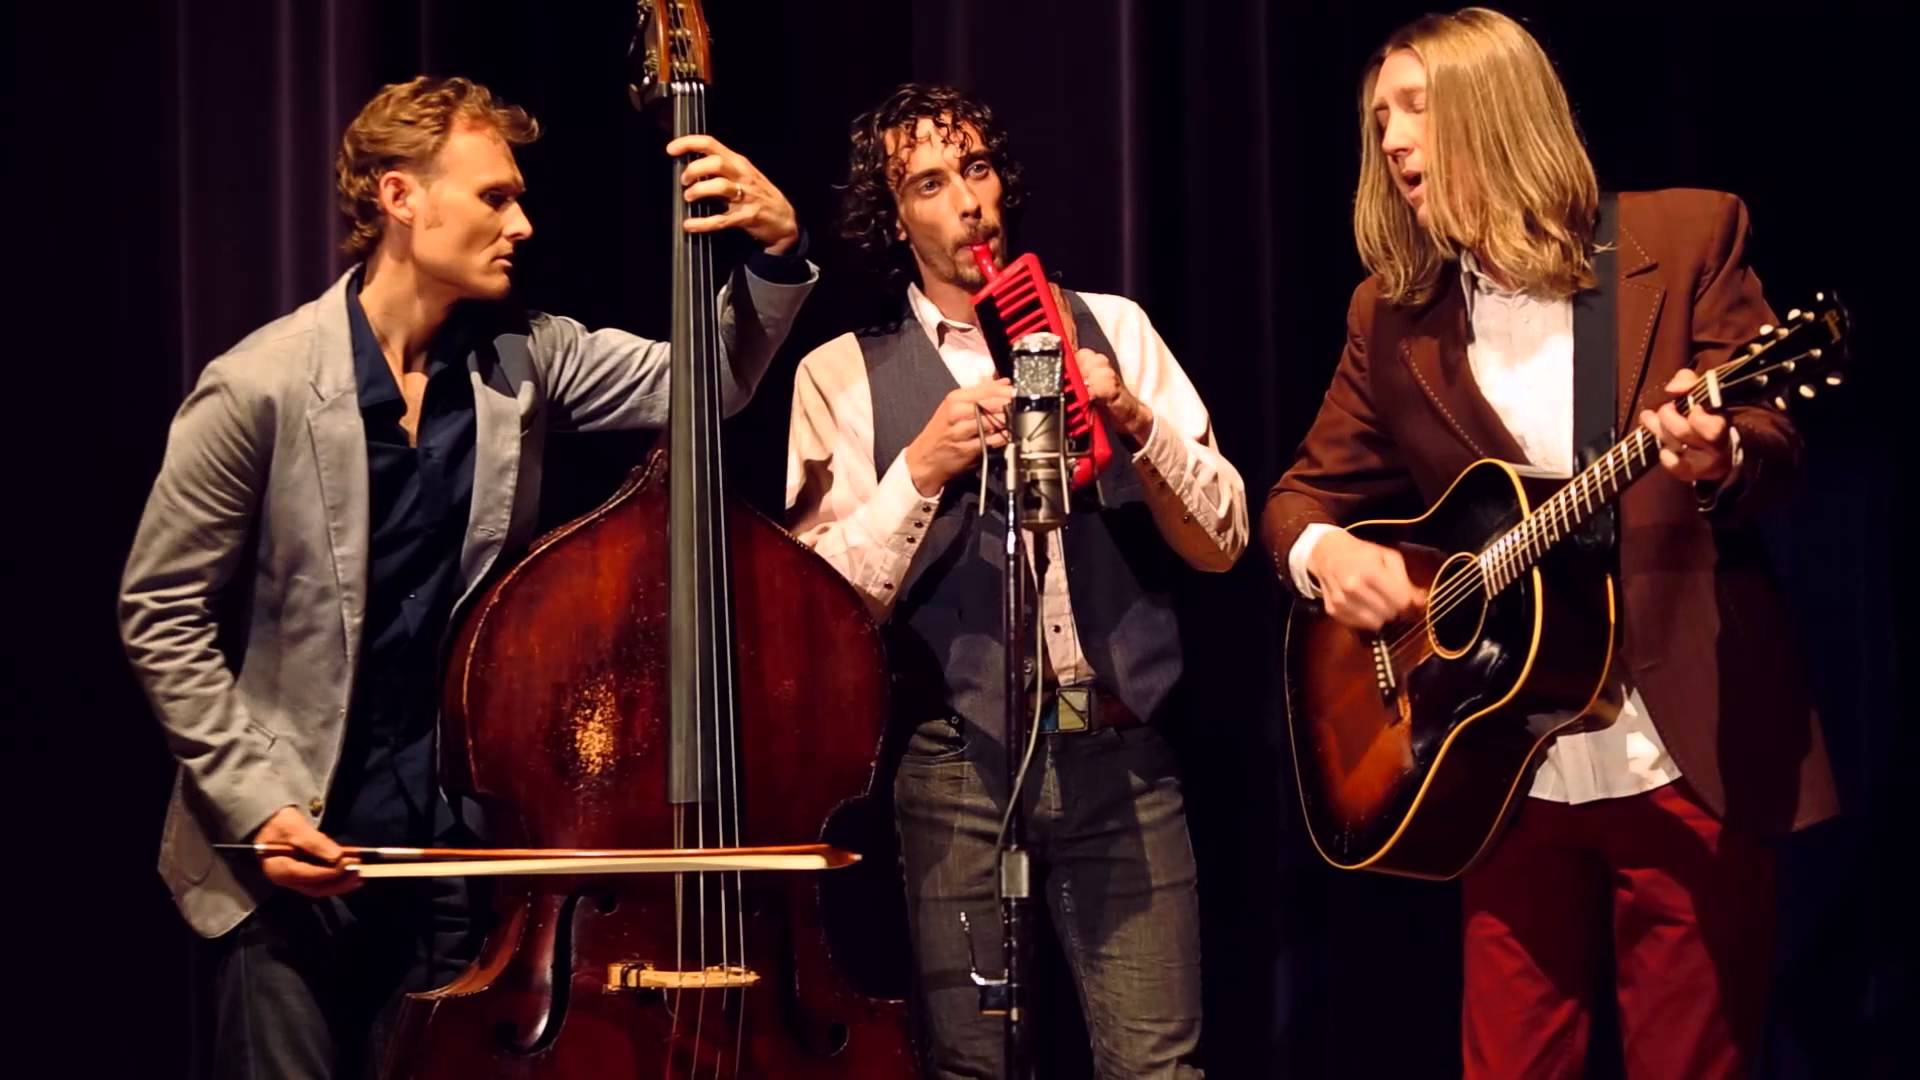 Review / Setlist | The Wood Brothers @ The Vic 11/7/15